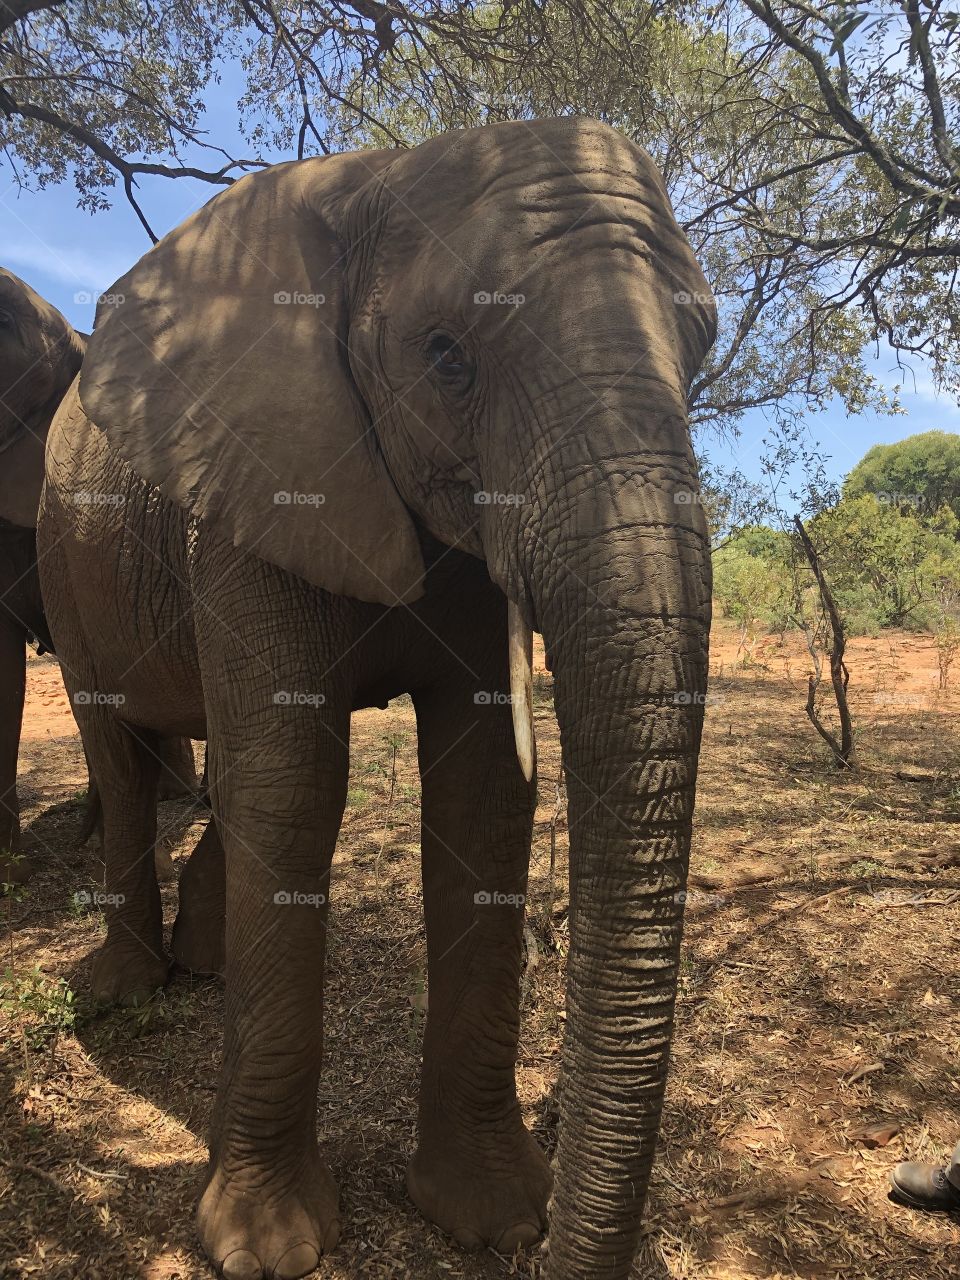 Elephant at glen afric in Johannesburg, South Africa. 